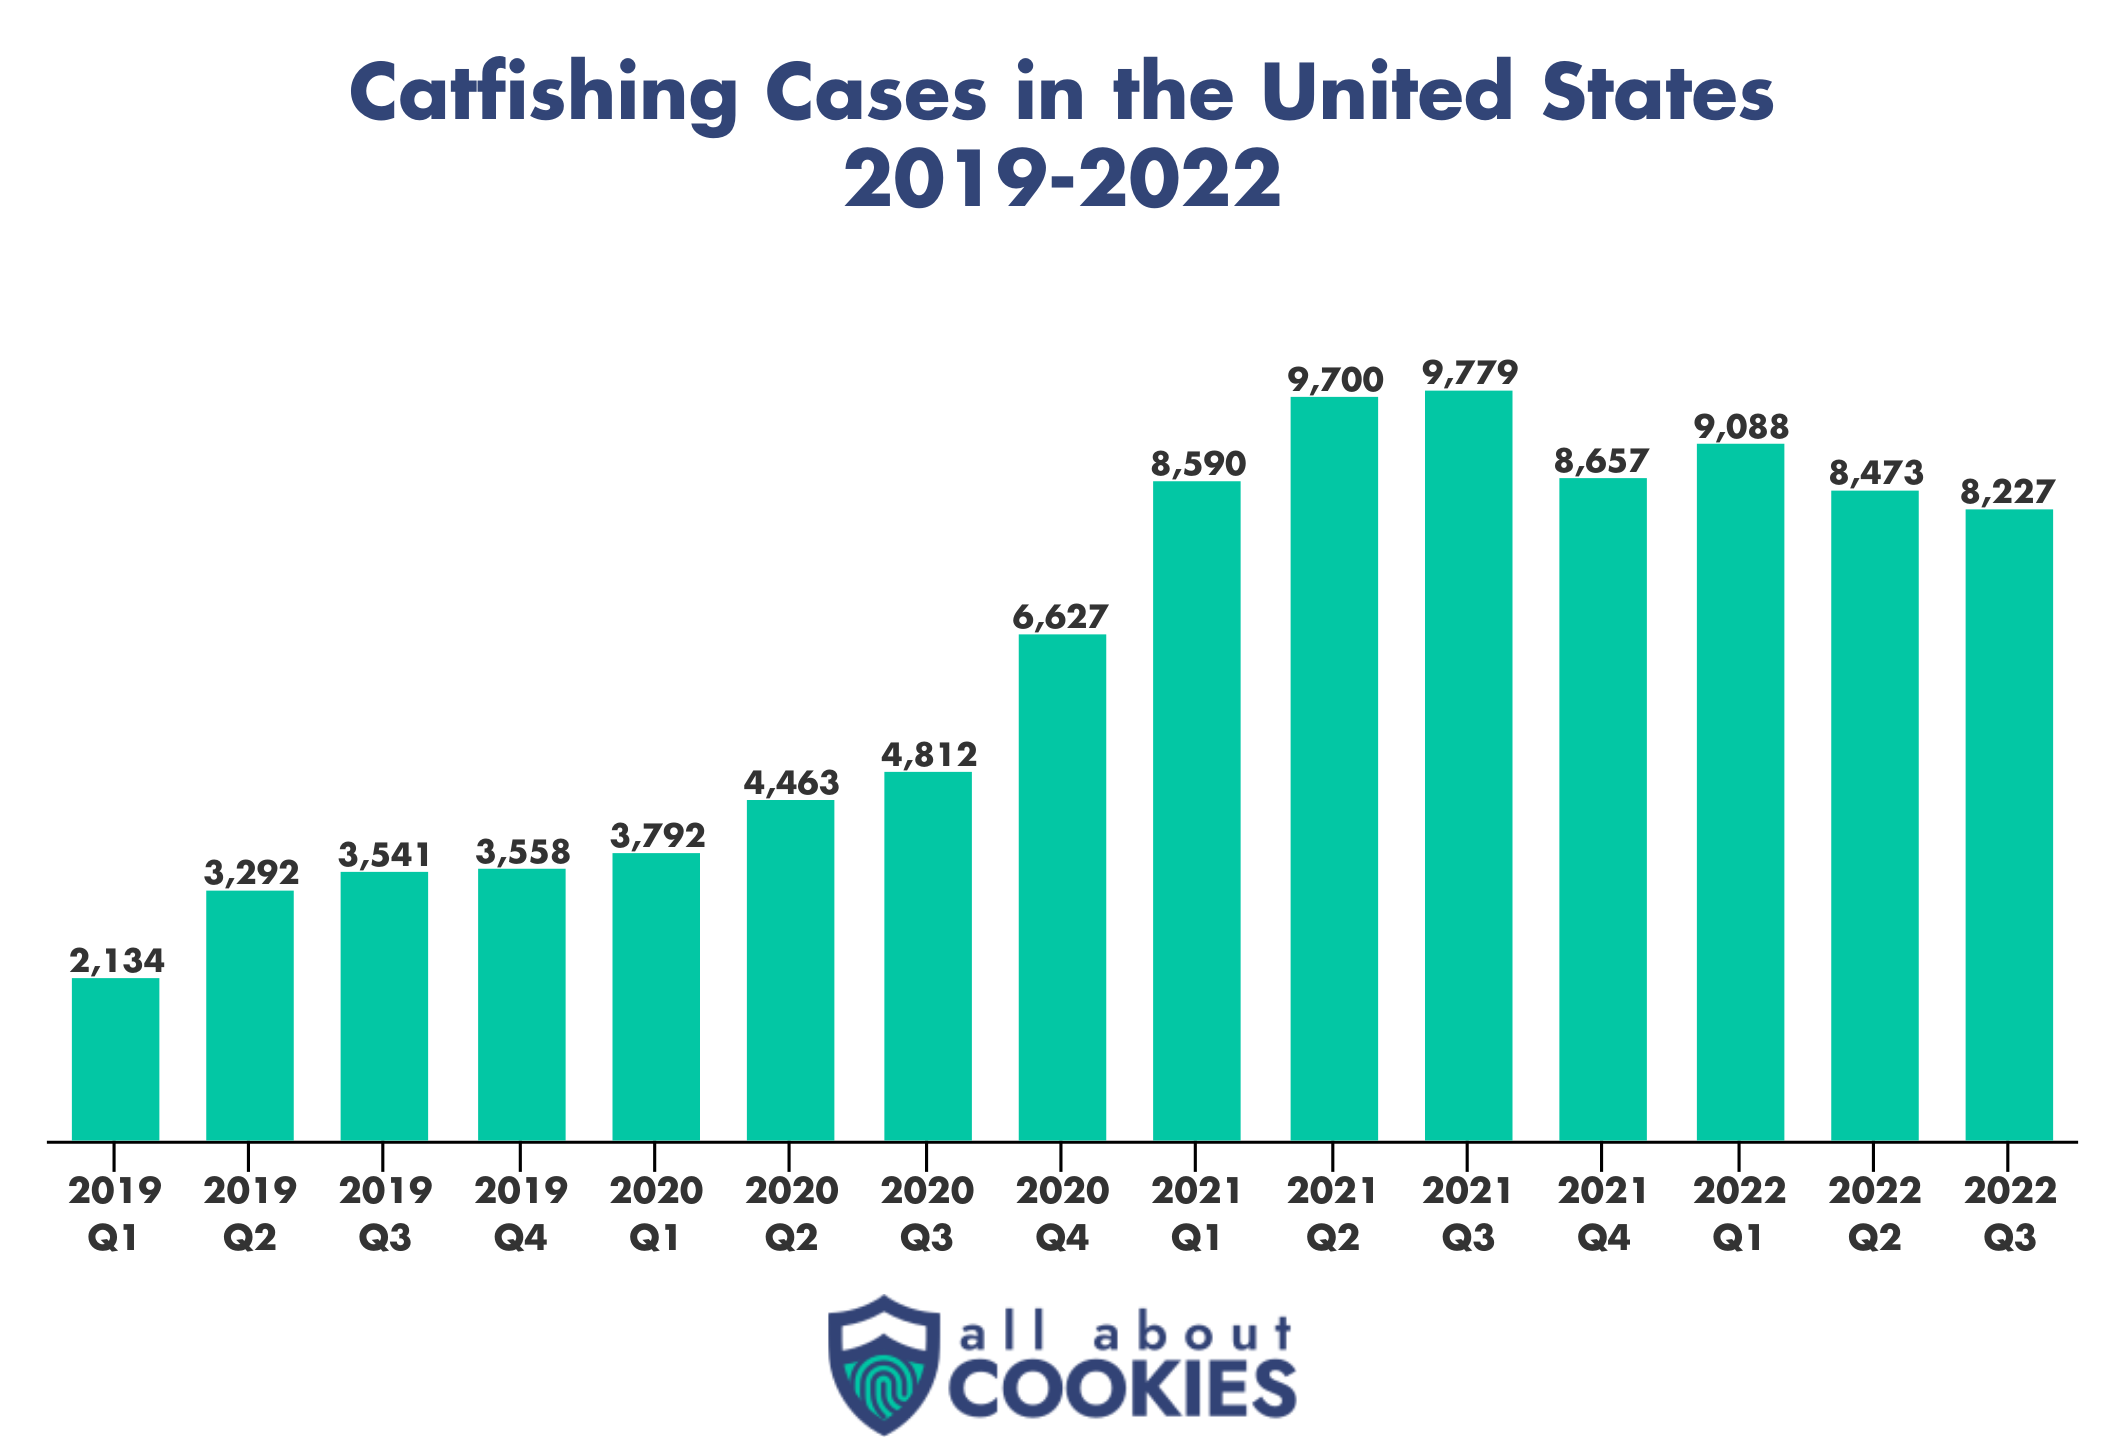 The number of catfishing scams in the US steadily rose from 2019 to 2021 and has stayed steady through 2022.